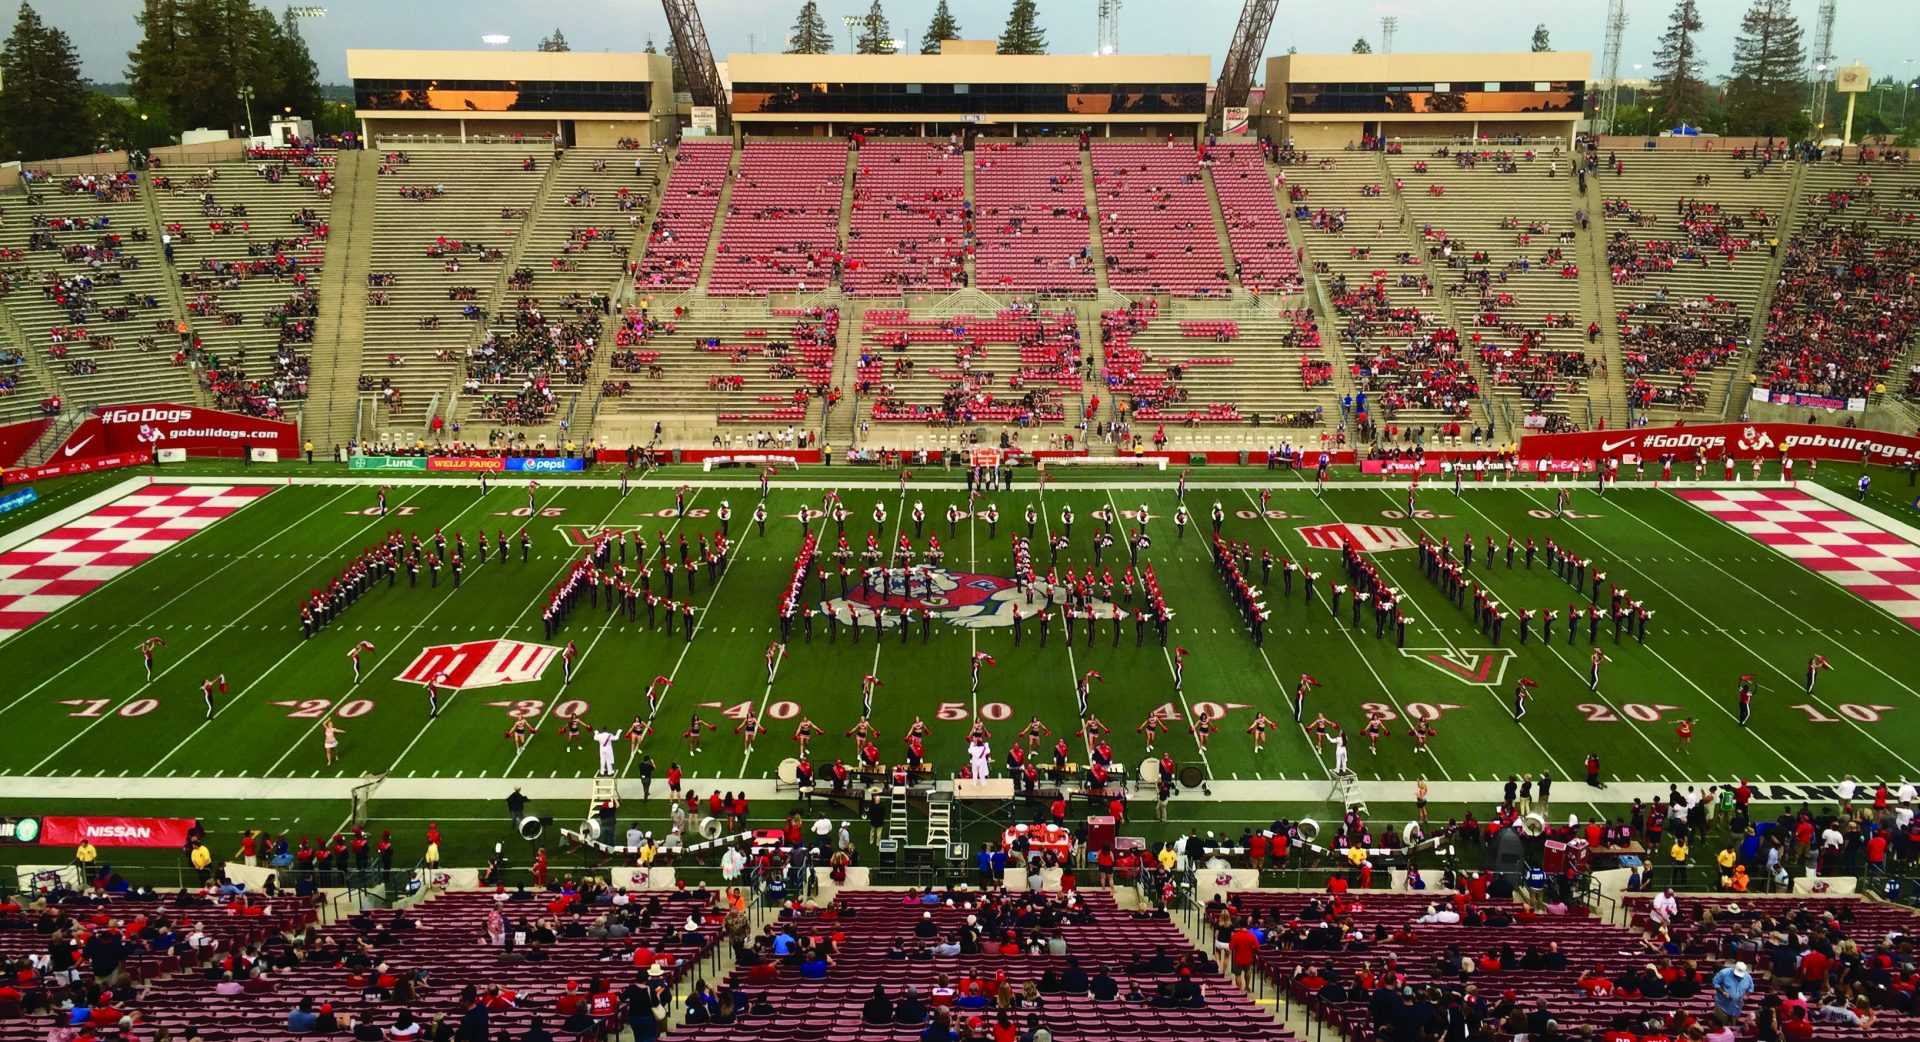 The Fresno State Marching Band spells out “Fresno” during the pregame performance on Saturday, Sept. 10, 2016. (Jenna Wilson/The Collegian)